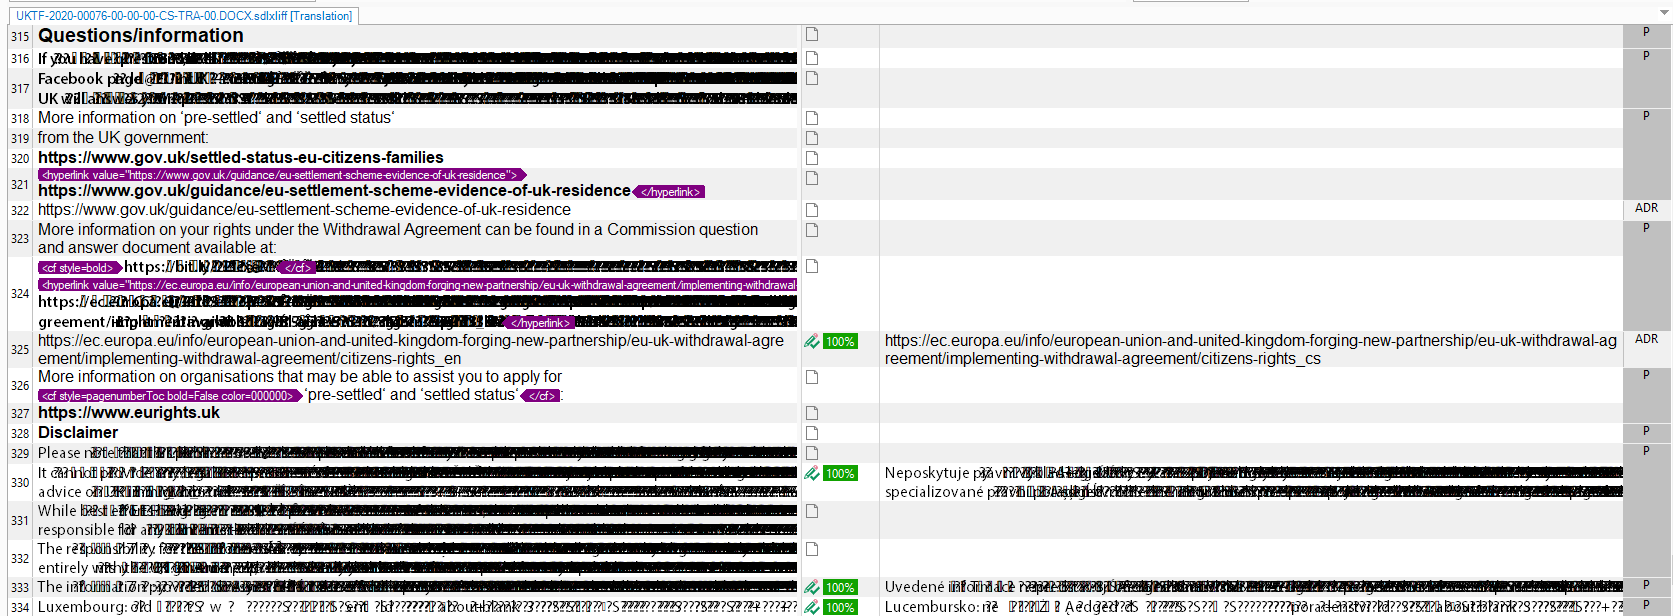 Screenshot of Trados Studio editor with unreadable signs in the source window, replacing expected text. Visible hyperlinks and style tags are interspersed with corrupted characters.